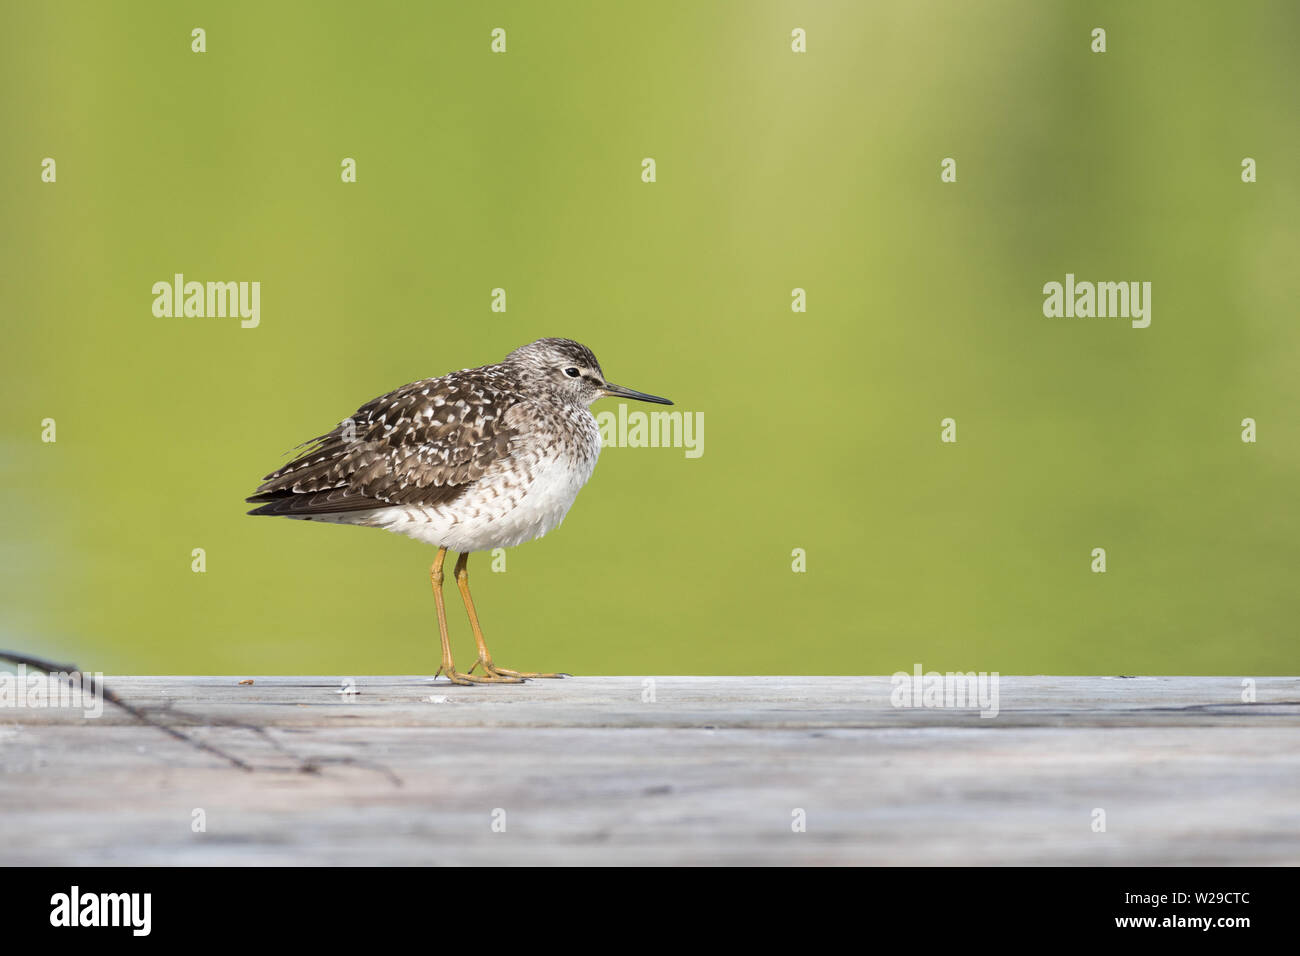 The wood sandpiper (Tringa glareola) sitting on a wooden pier on the edge of the lake, September, Finland Stock Photo